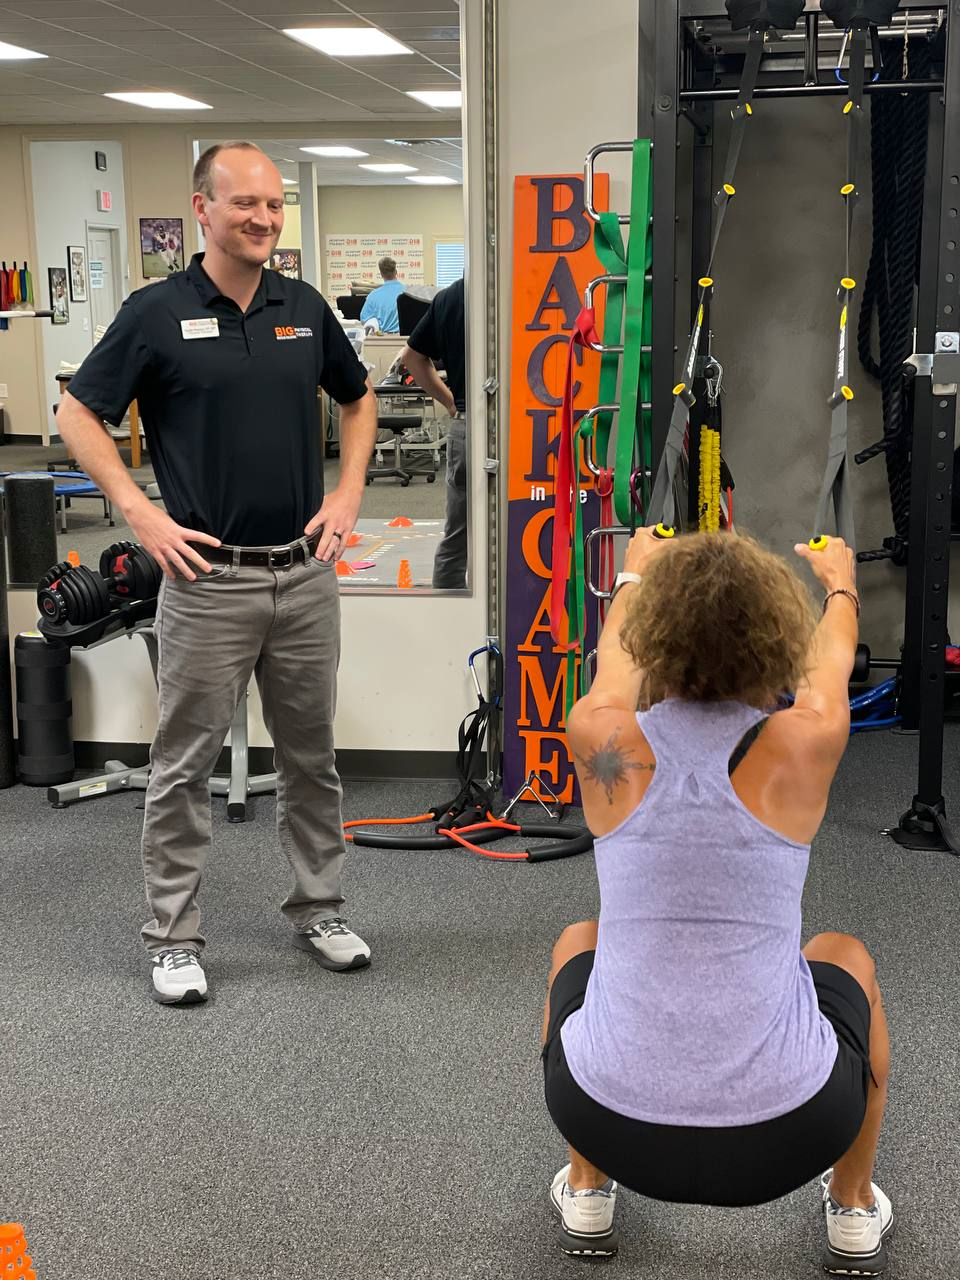 Back in the Game physical therapist watching a patient and coaching her through musculoskeletal therapy